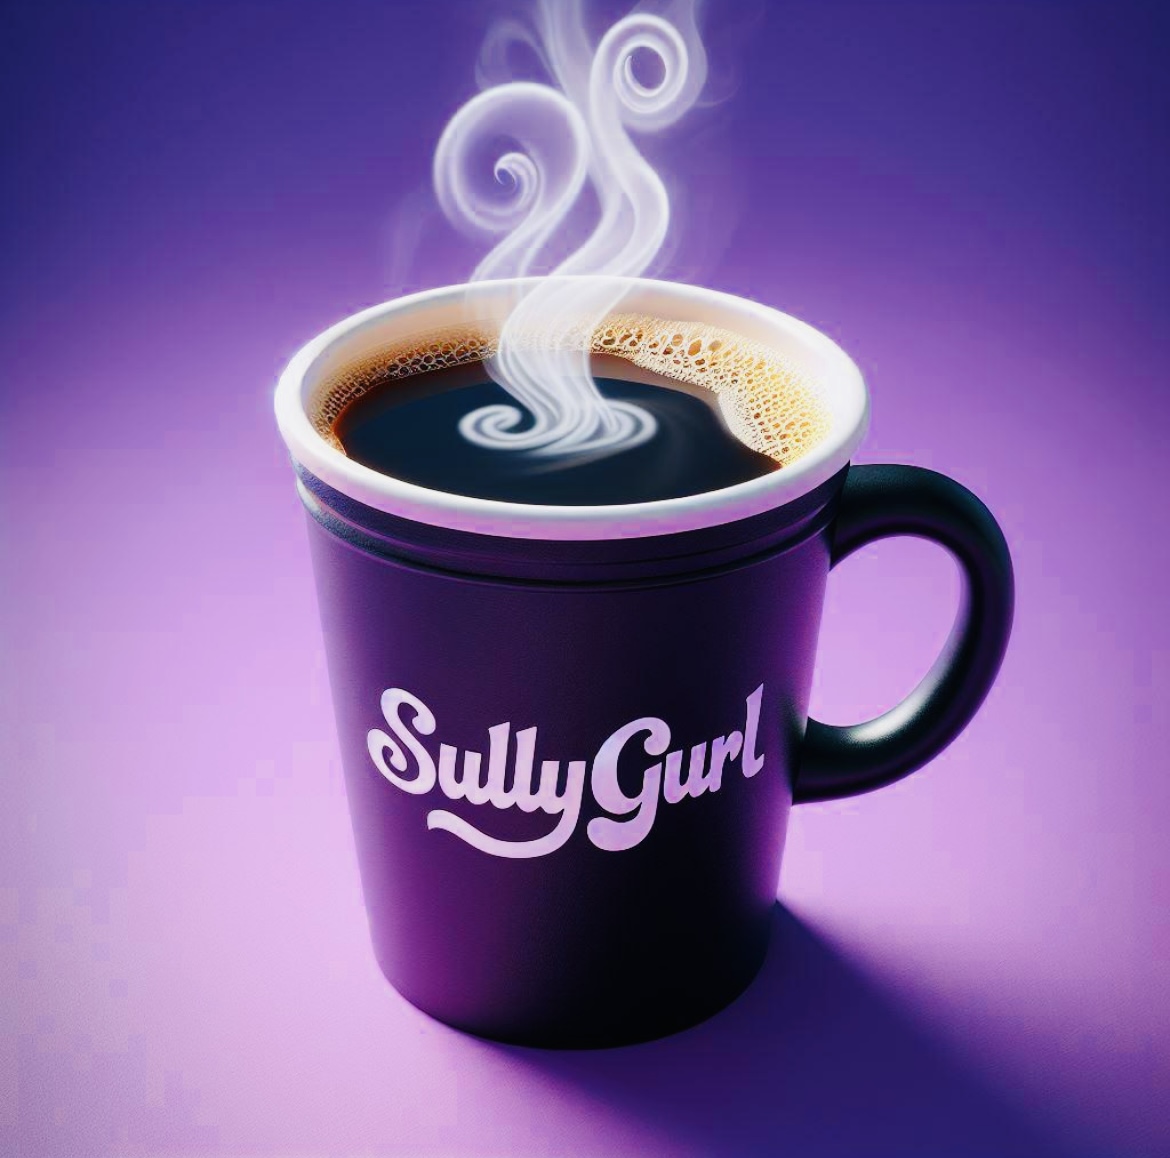 Rise and GRIND, entrepreneurs! ☕ Here’s a cup of motivation to kick start your Tuesday. Remember, dreams brew with action - let’s make every sip count! #TuesdayMotivation #EntrepreneurSpirit #SullyGurlCup #MorningHustle